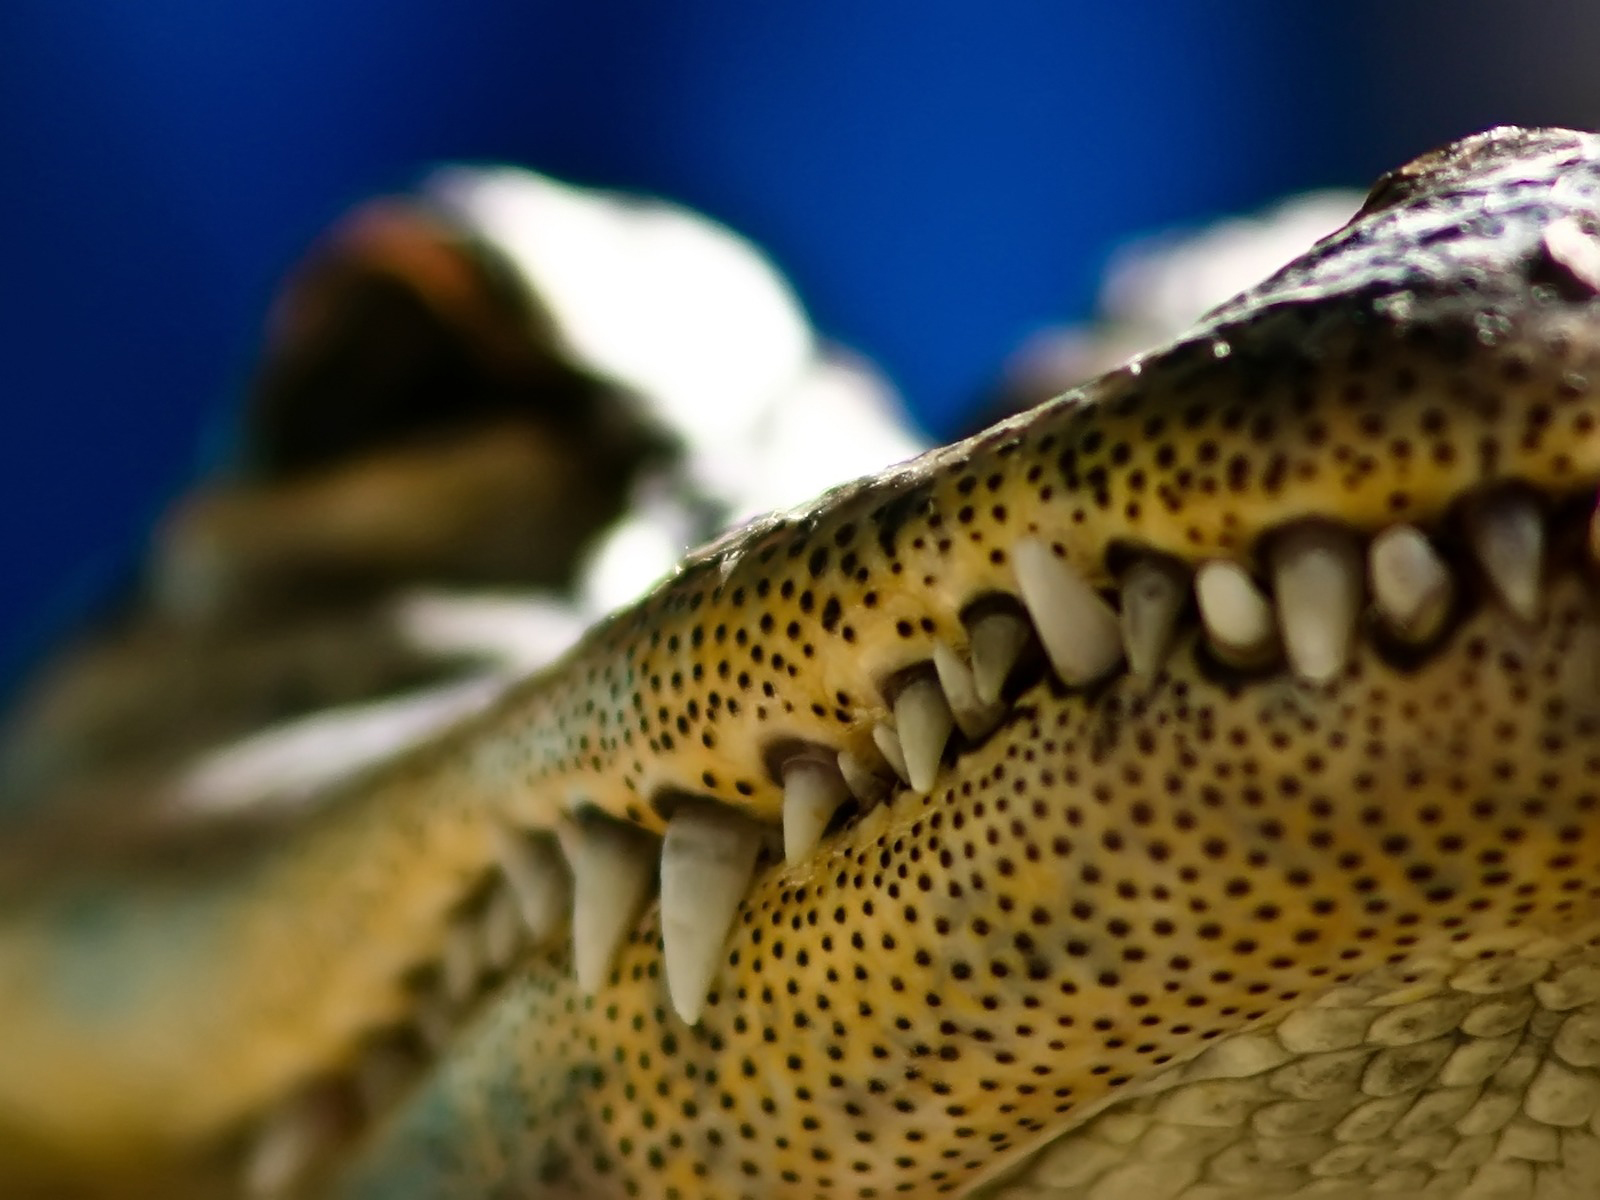 The crocodile mouth close up wallpaper Animal desktop background